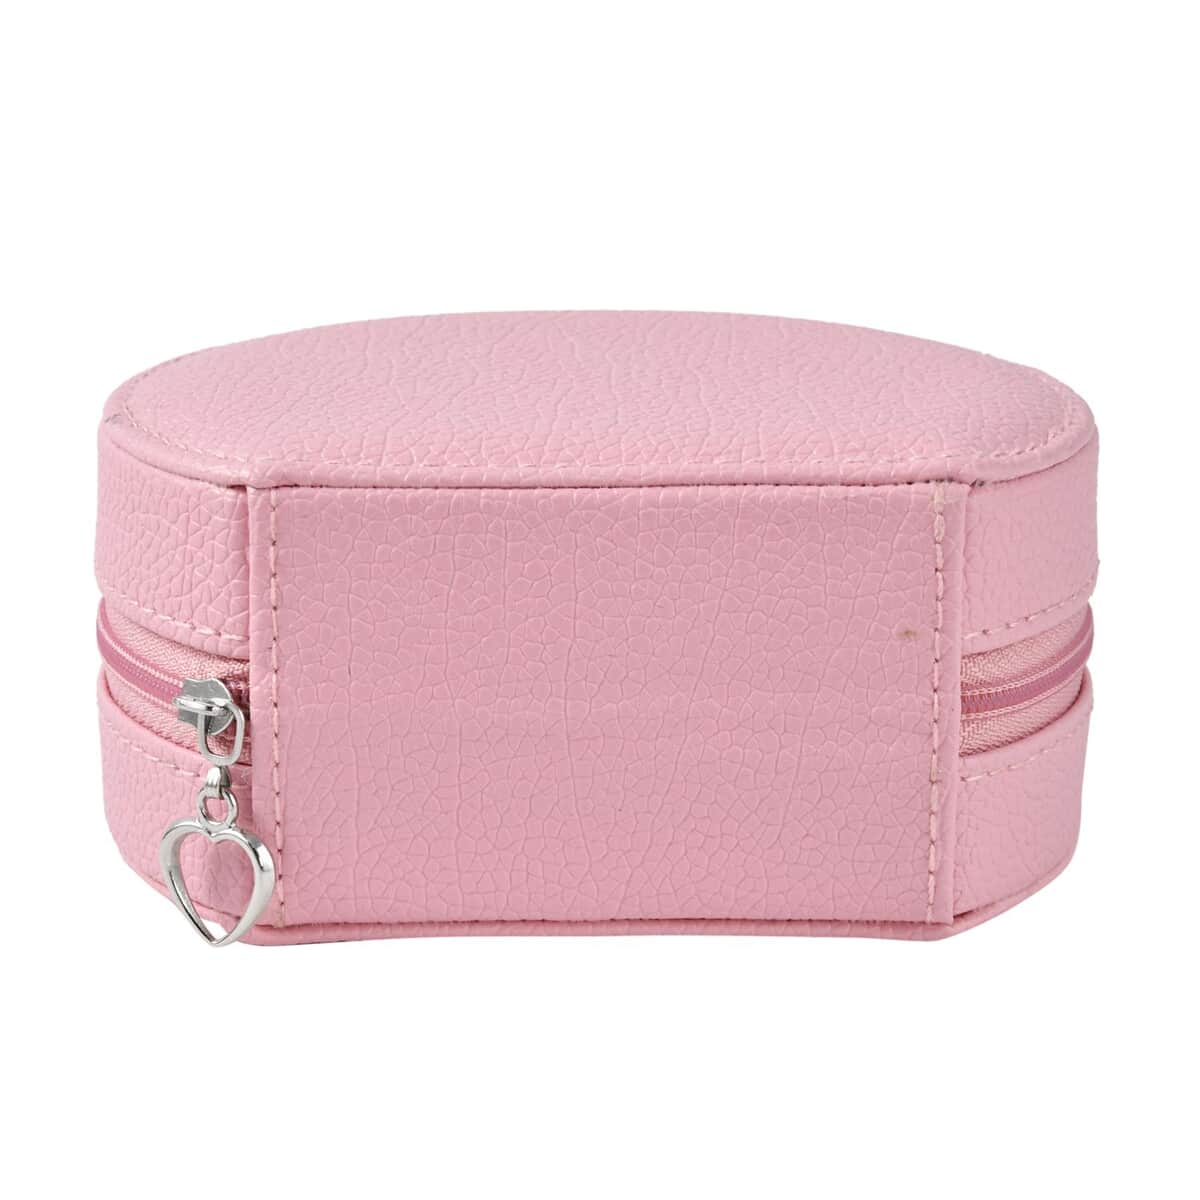 Pink Double Layer Faux Leather Jewelry Box with Zipper (4.9"x4.3"x2") image number 5